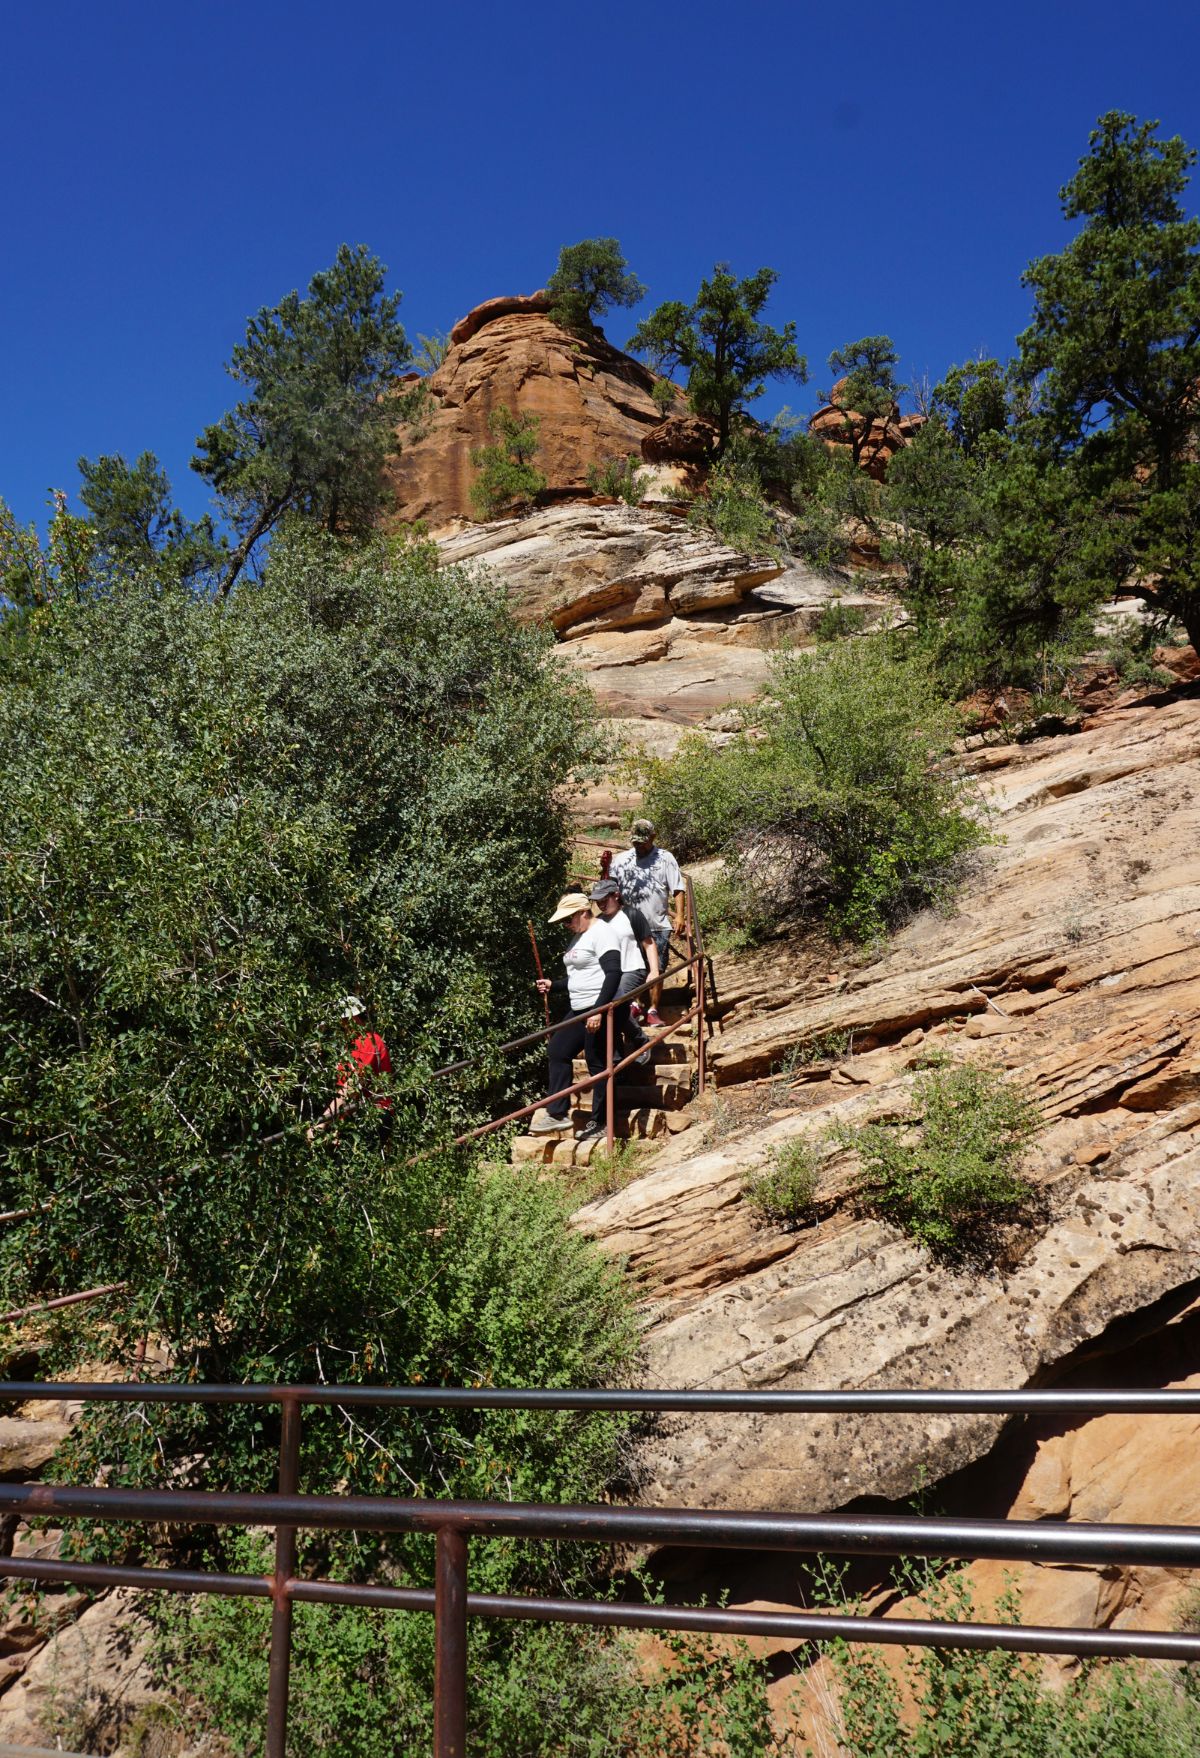 A group of people walking up a rocky path zion national park.